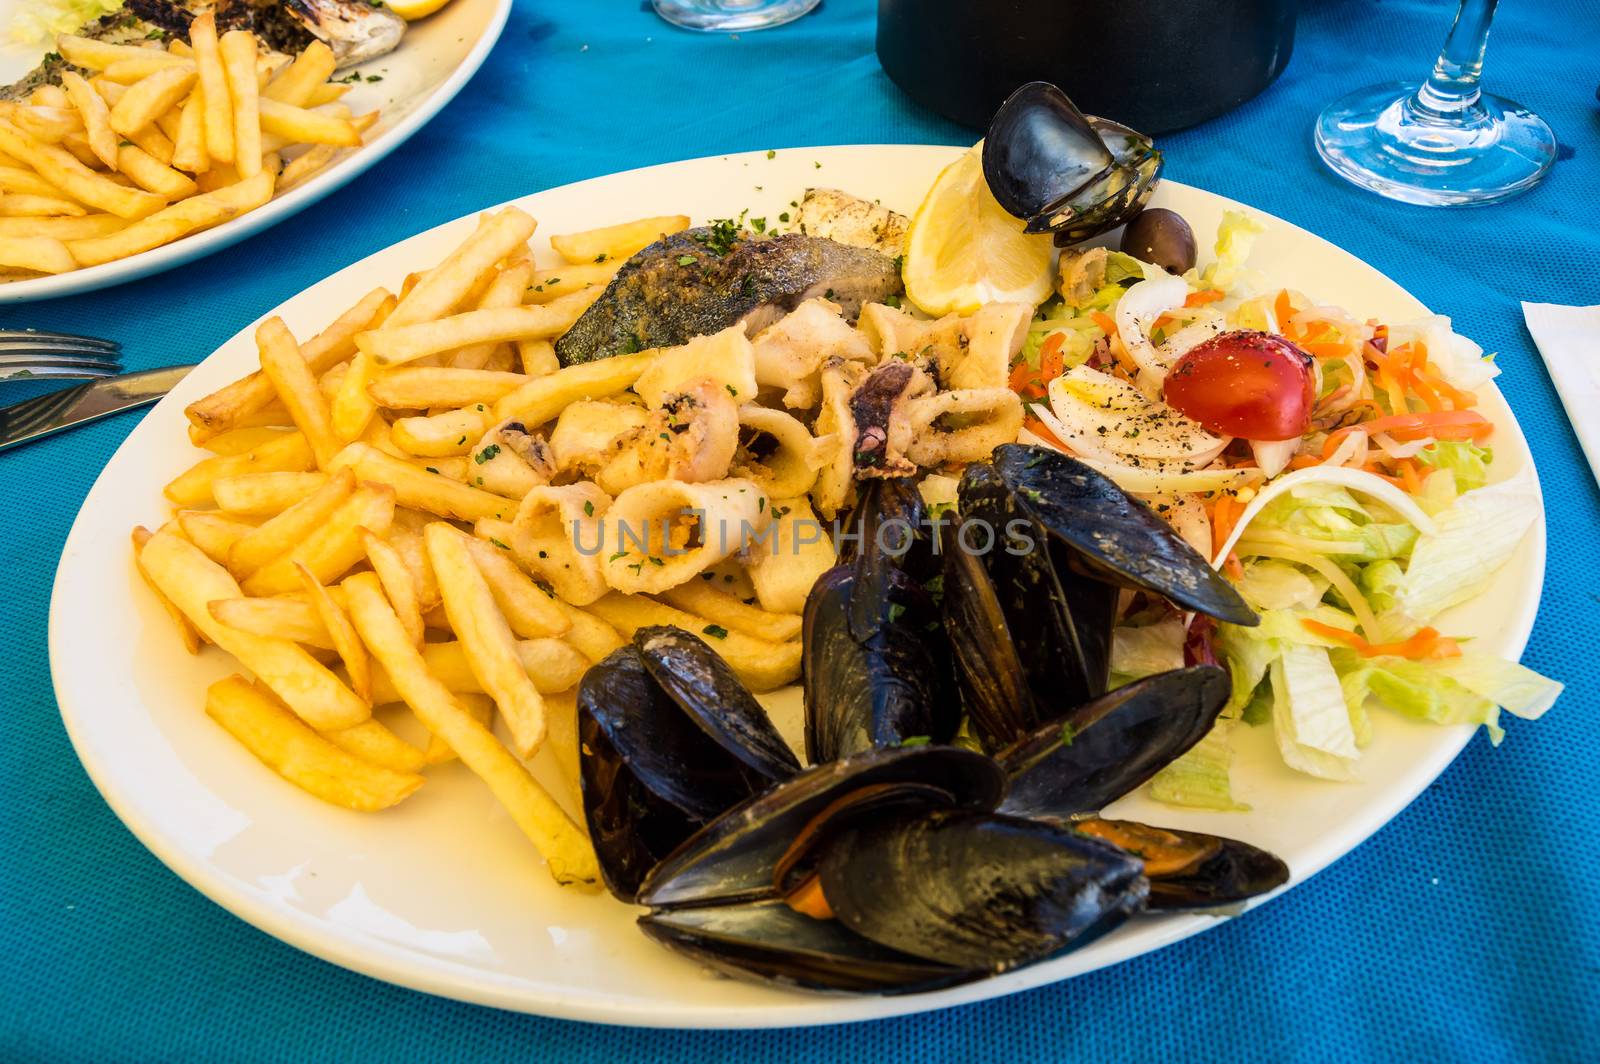 Seafood platter with fries and small vegetables in Malta